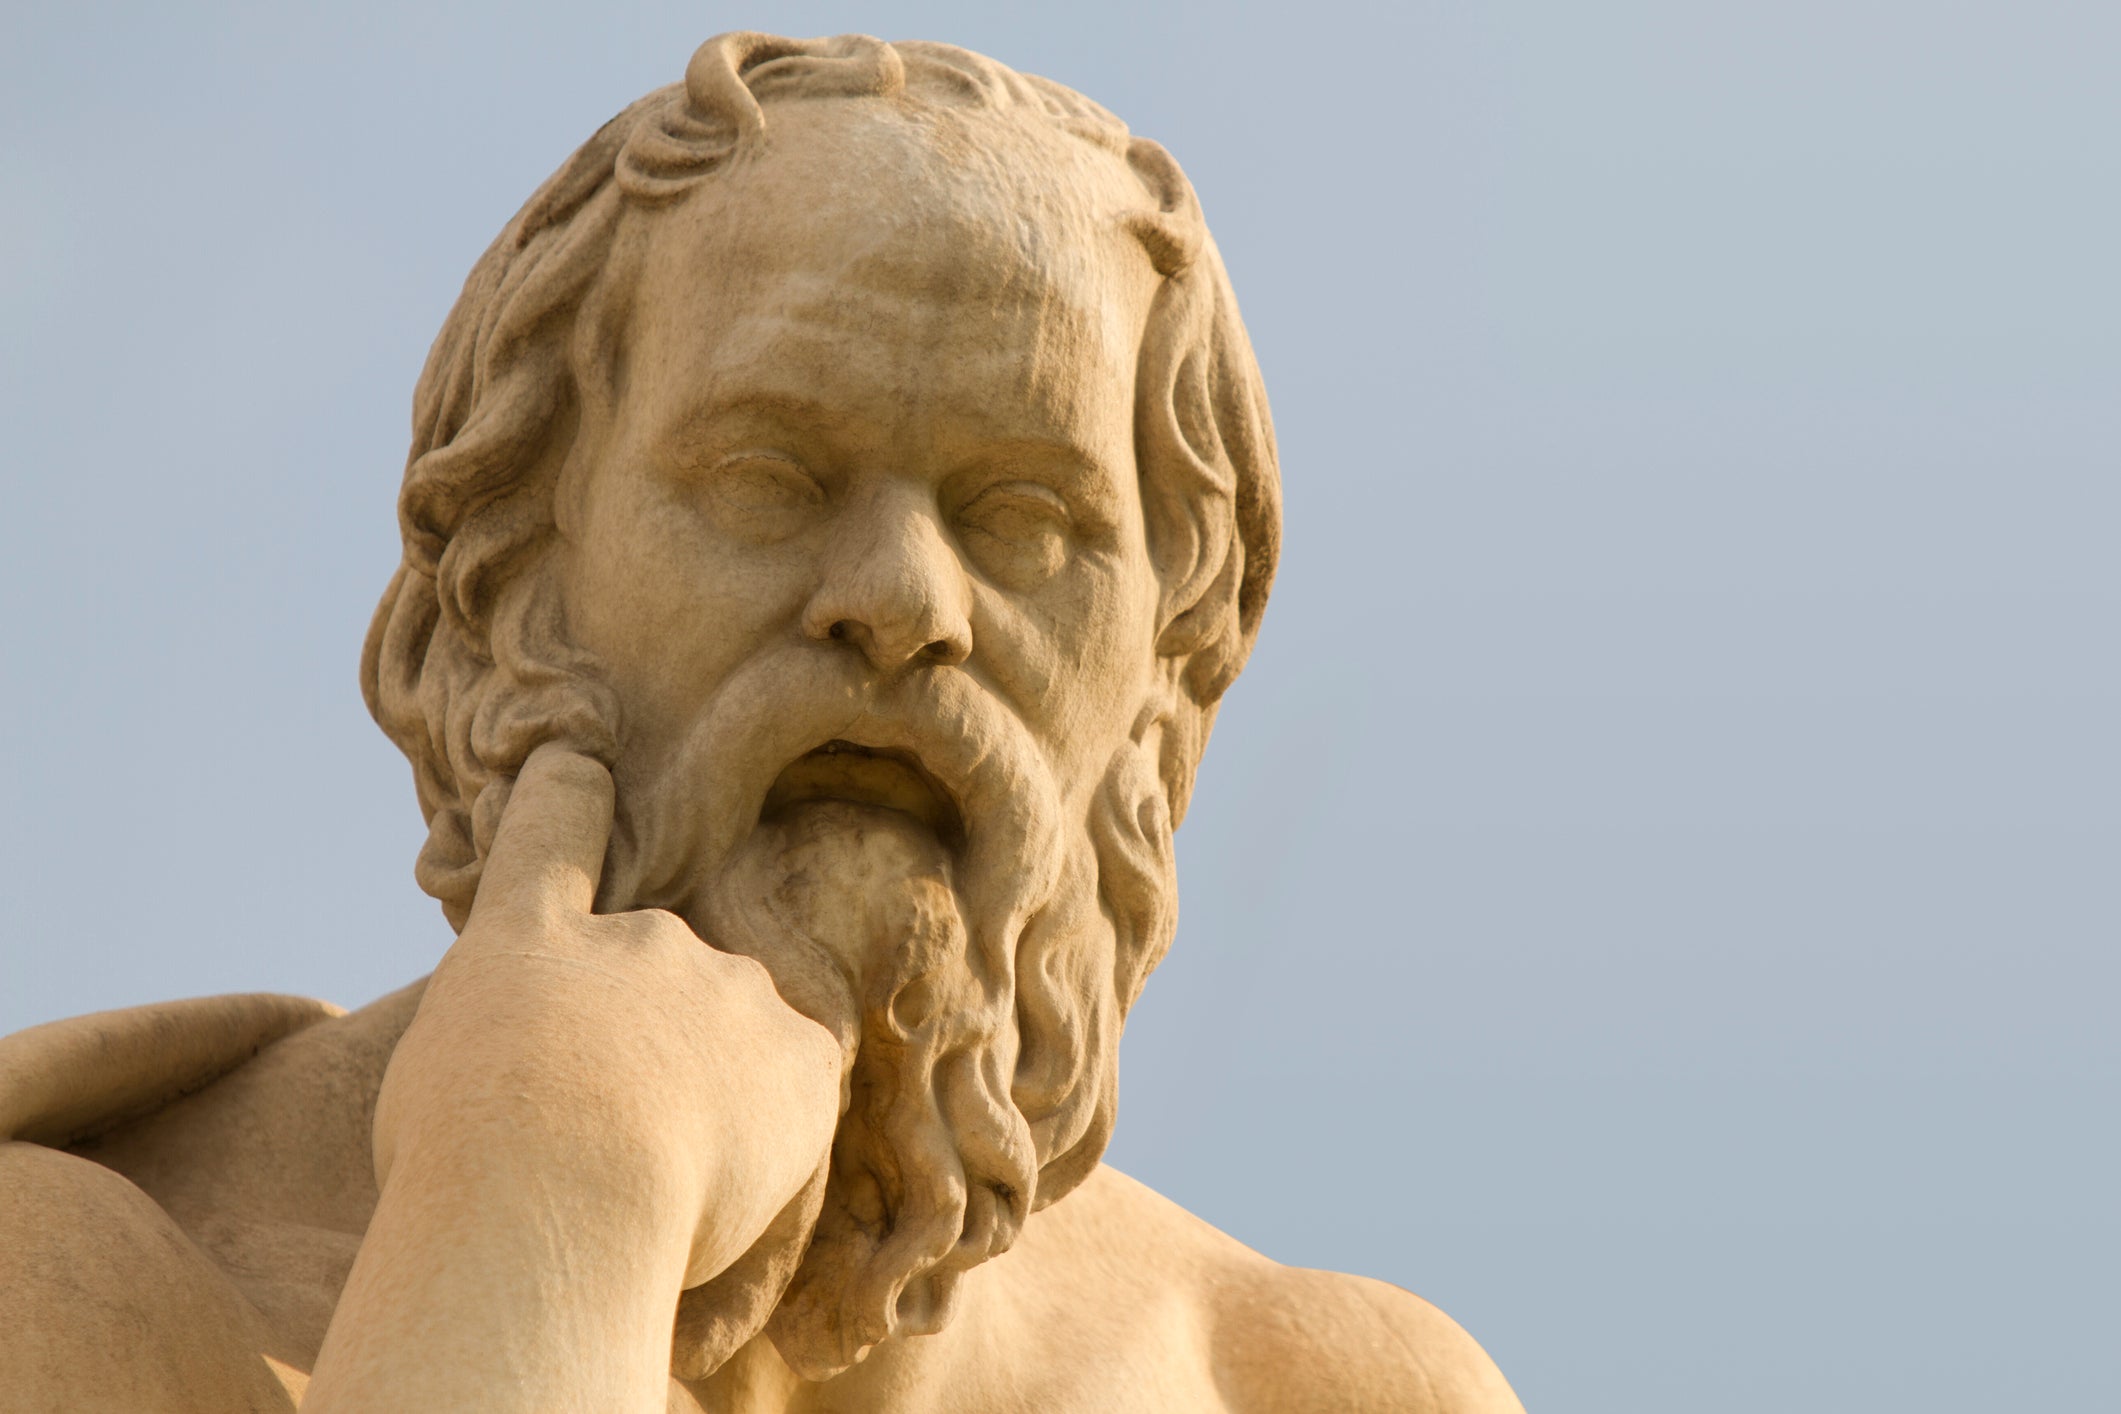 ‘It may be that Socrates finds value not in getting at the truth but looking for it in conversation’